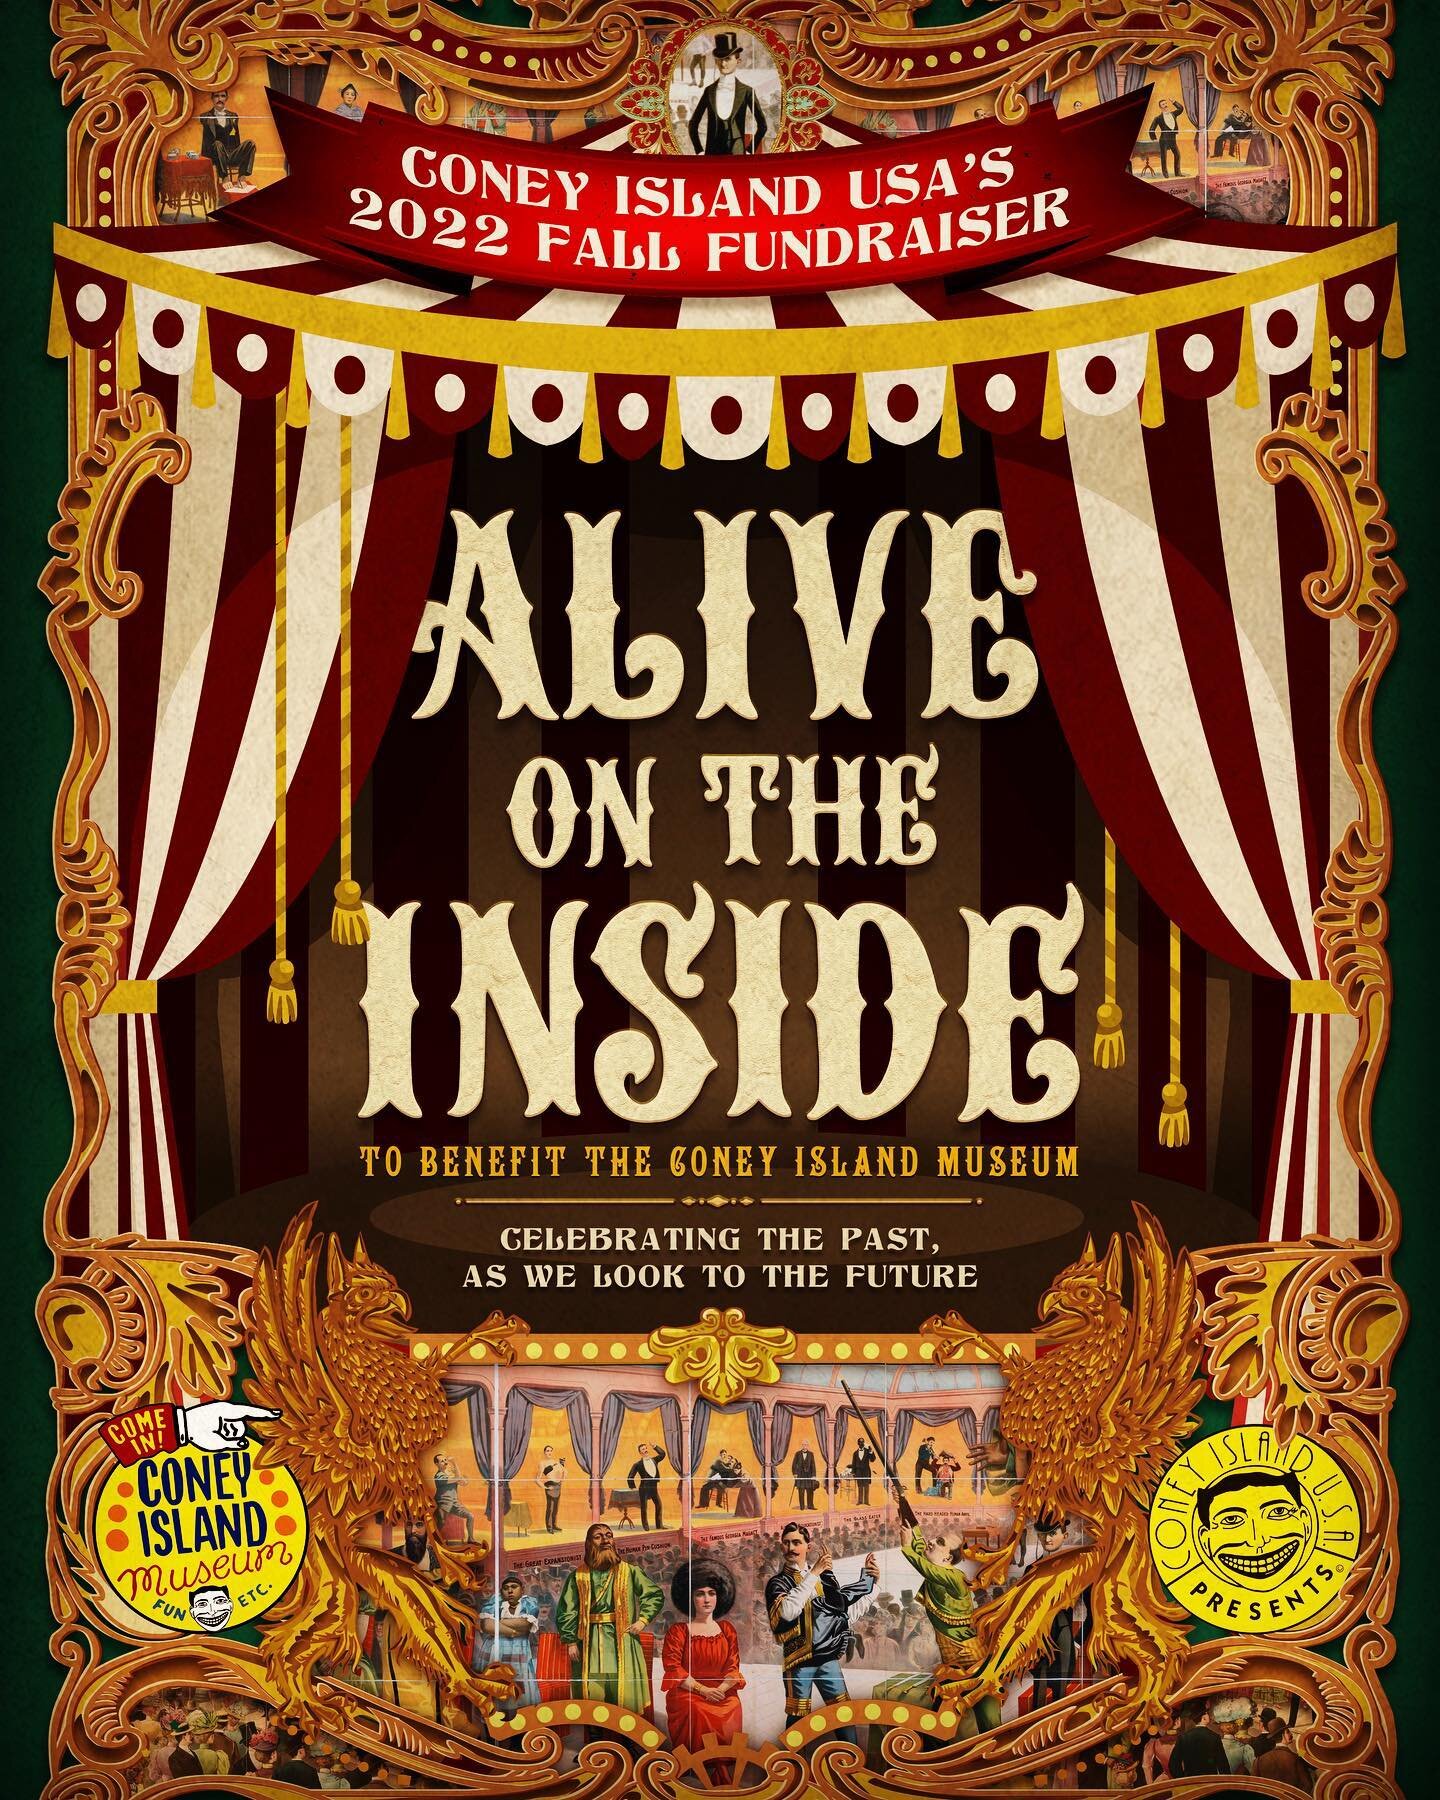 One week from today, CIUSA hosts &ldquo;Alive On the Inside&rdquo;, our annual fall fundraiser to benefit the Coney Island Museum! Join us for live entertainment, hors d&rsquo;oeuvres, sponsored libations, raffles, prizes, and more &mdash; all to sup